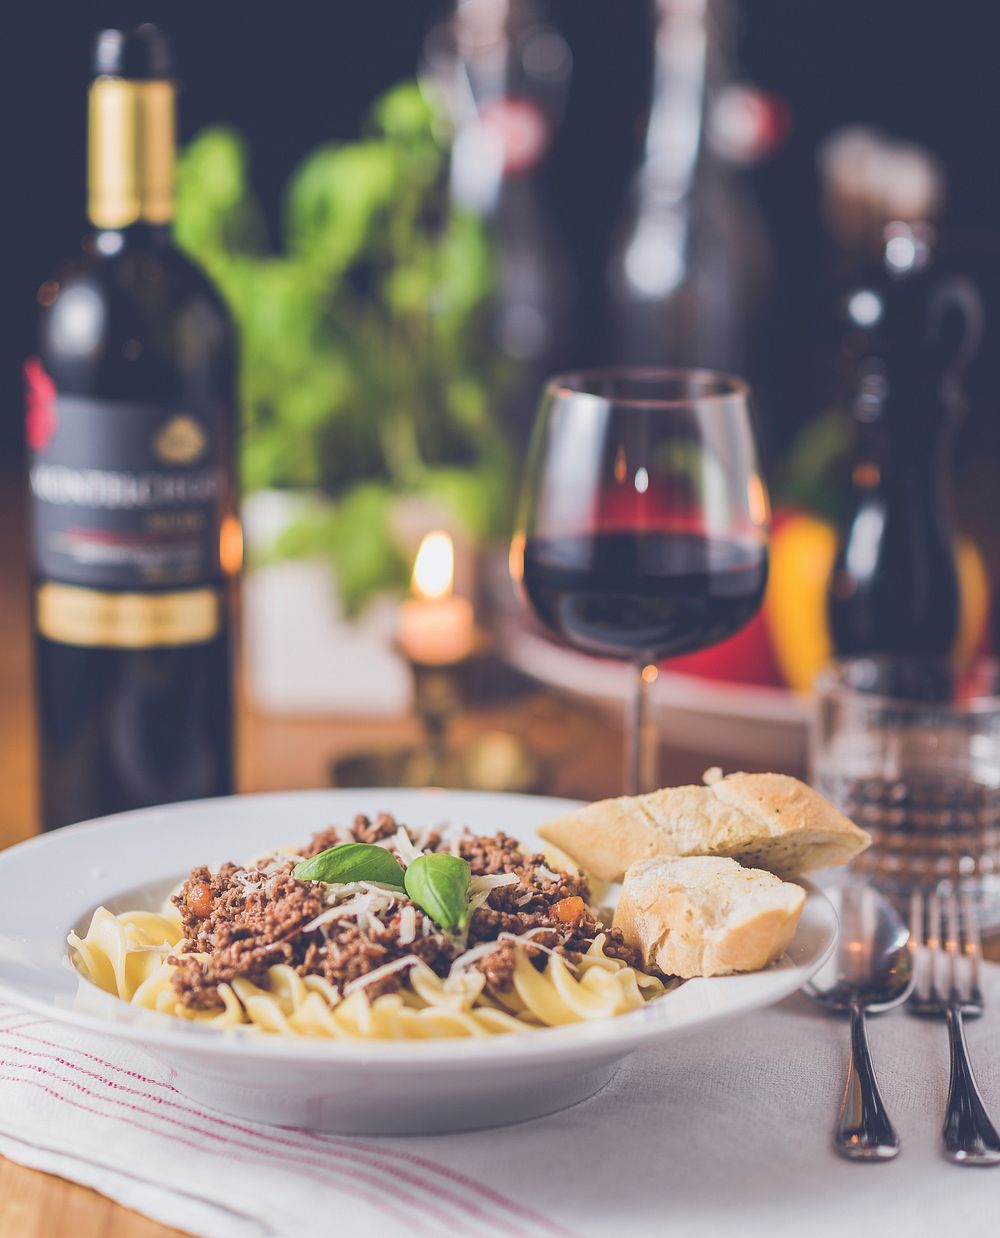 A plate with a pasta dish next to a wine bottle and a glass of red wine on a set table. Original public domain image from…